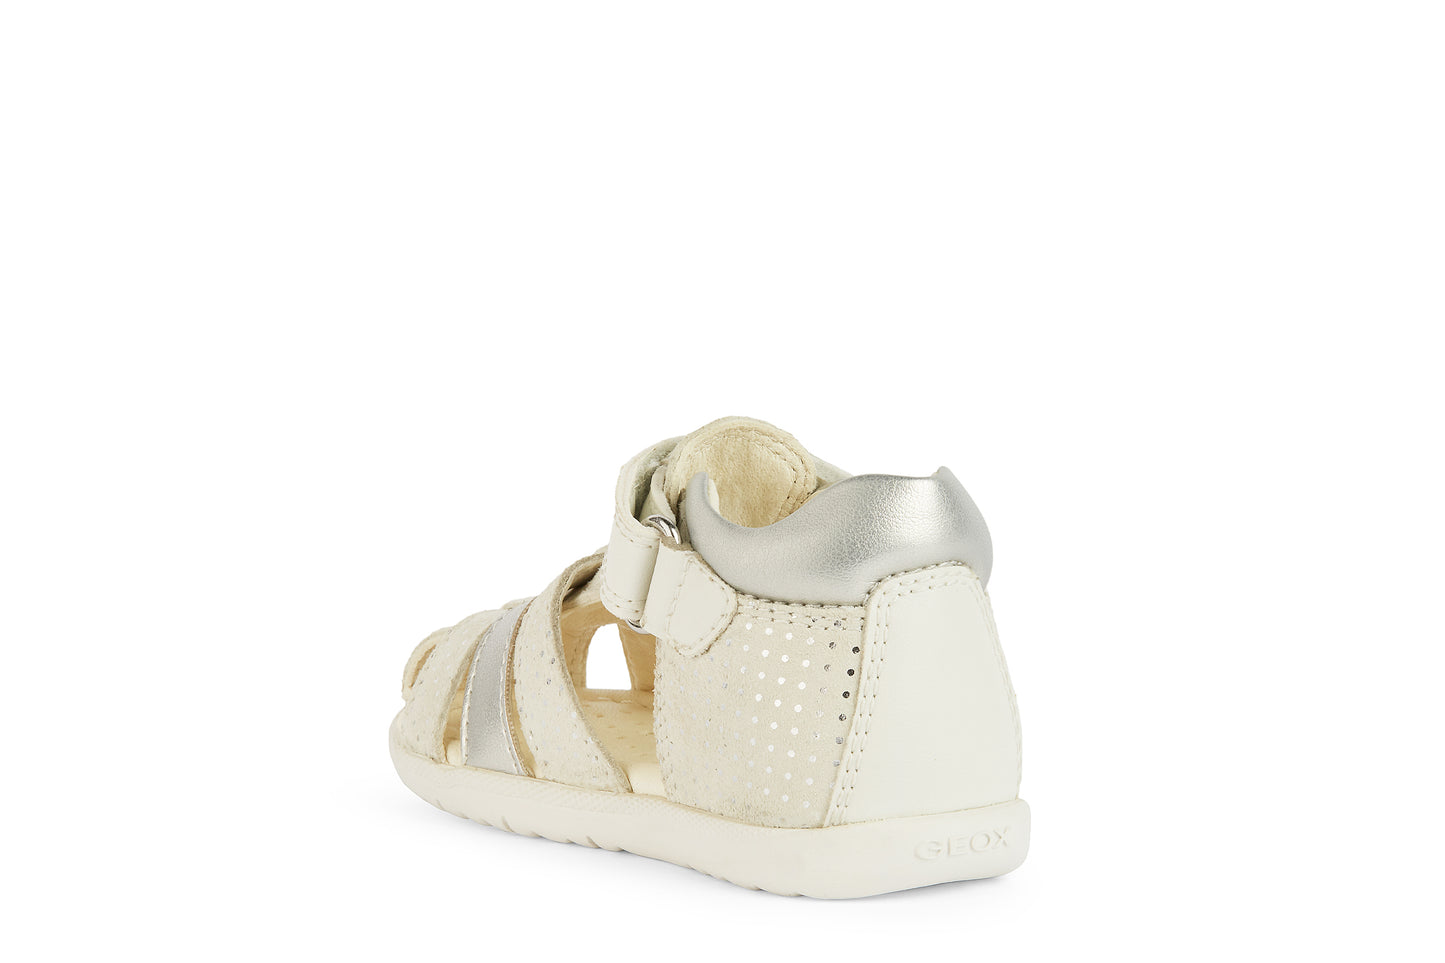 A girls closed toe sandal by Geox, style B Macchia, in off white and spot print silver nubuck leather with velcro fastening. Angled left side view.